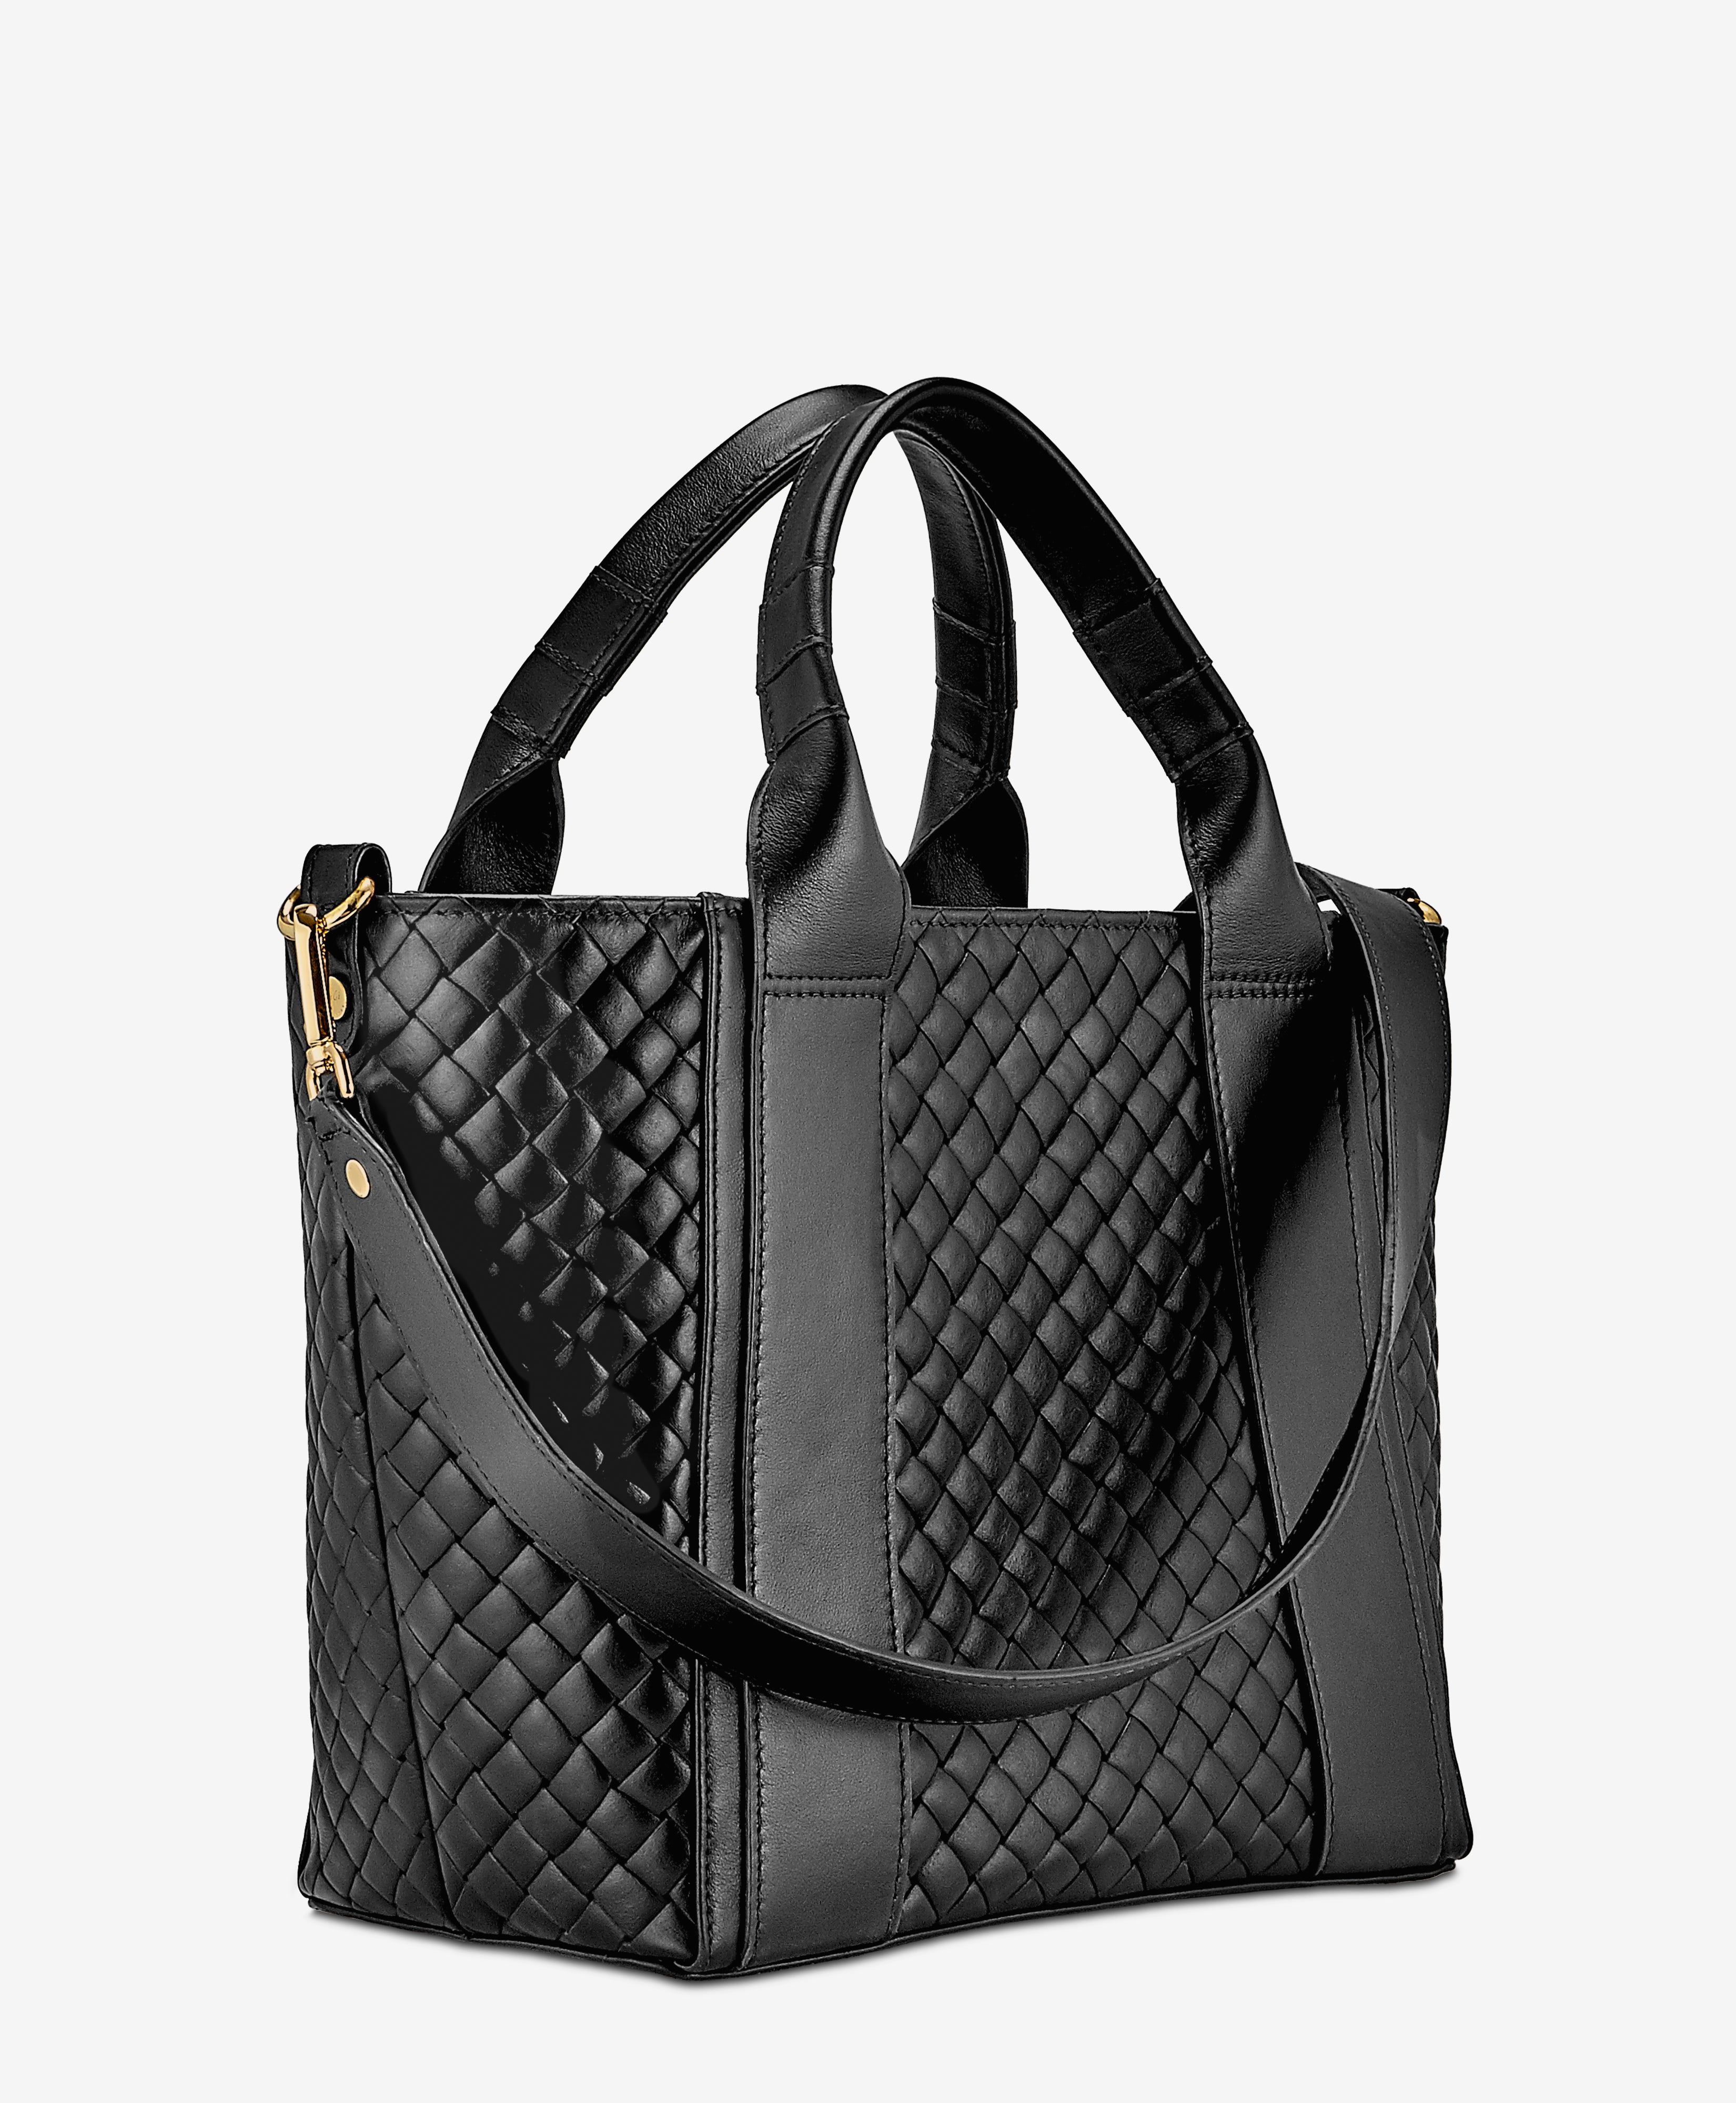 GiGi New York With Love From Kat Sag Harbor Leather Trimmed Canvas Tote,  $228, Saks Fifth Avenue